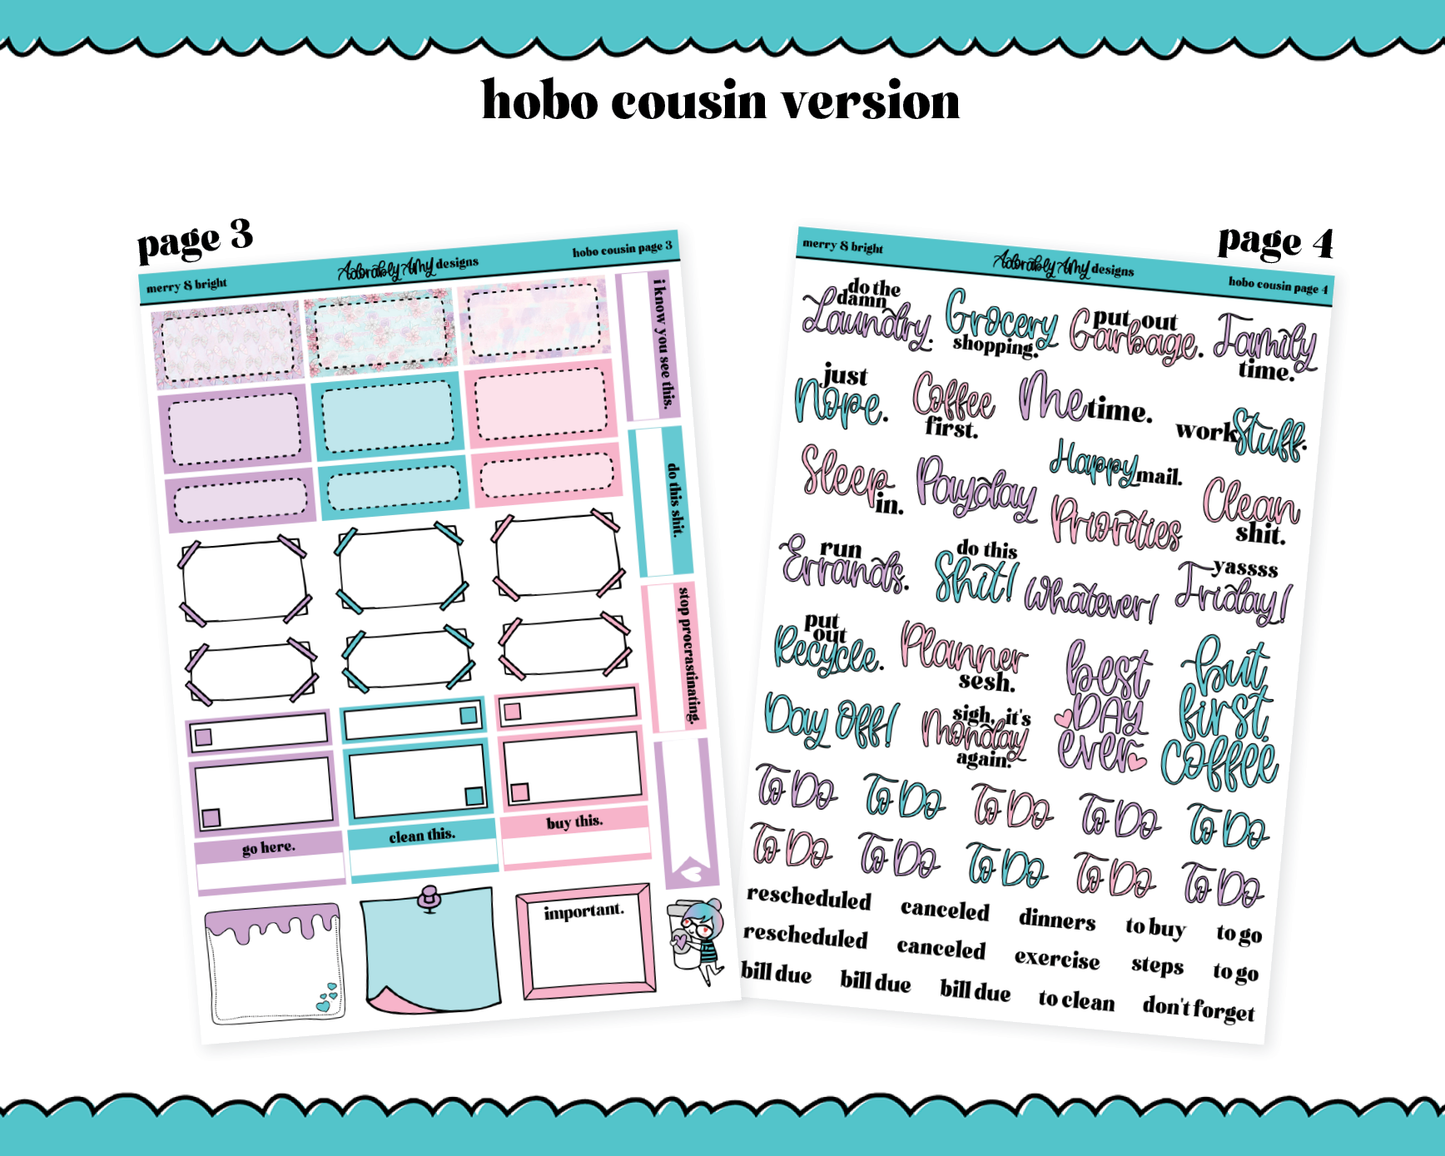 Hobonichi Cousin Weekly Merry & Bright Christmas Themed Planner Sticker Kit for Hobo Cousin or Similar Planners